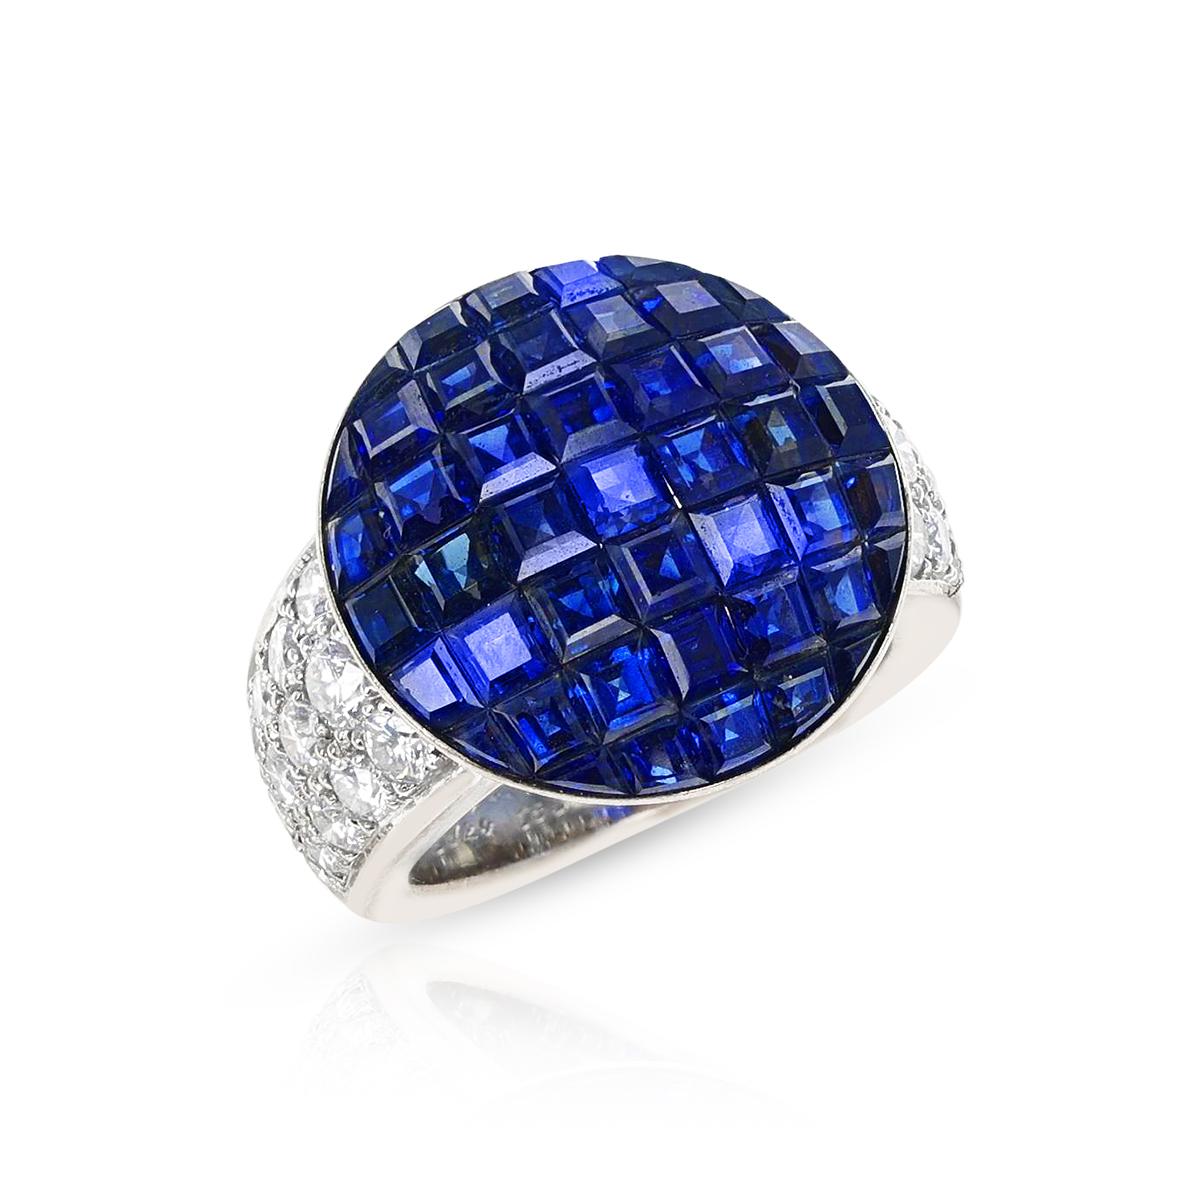 A Van Cleef & Arpels Mysery Set Sapphire Ring with Diamonds, 18k. The ring size is US 5.50. The diamond weight is appx. 1.20 carats. The total weight of the ring is 13.40 grams. 